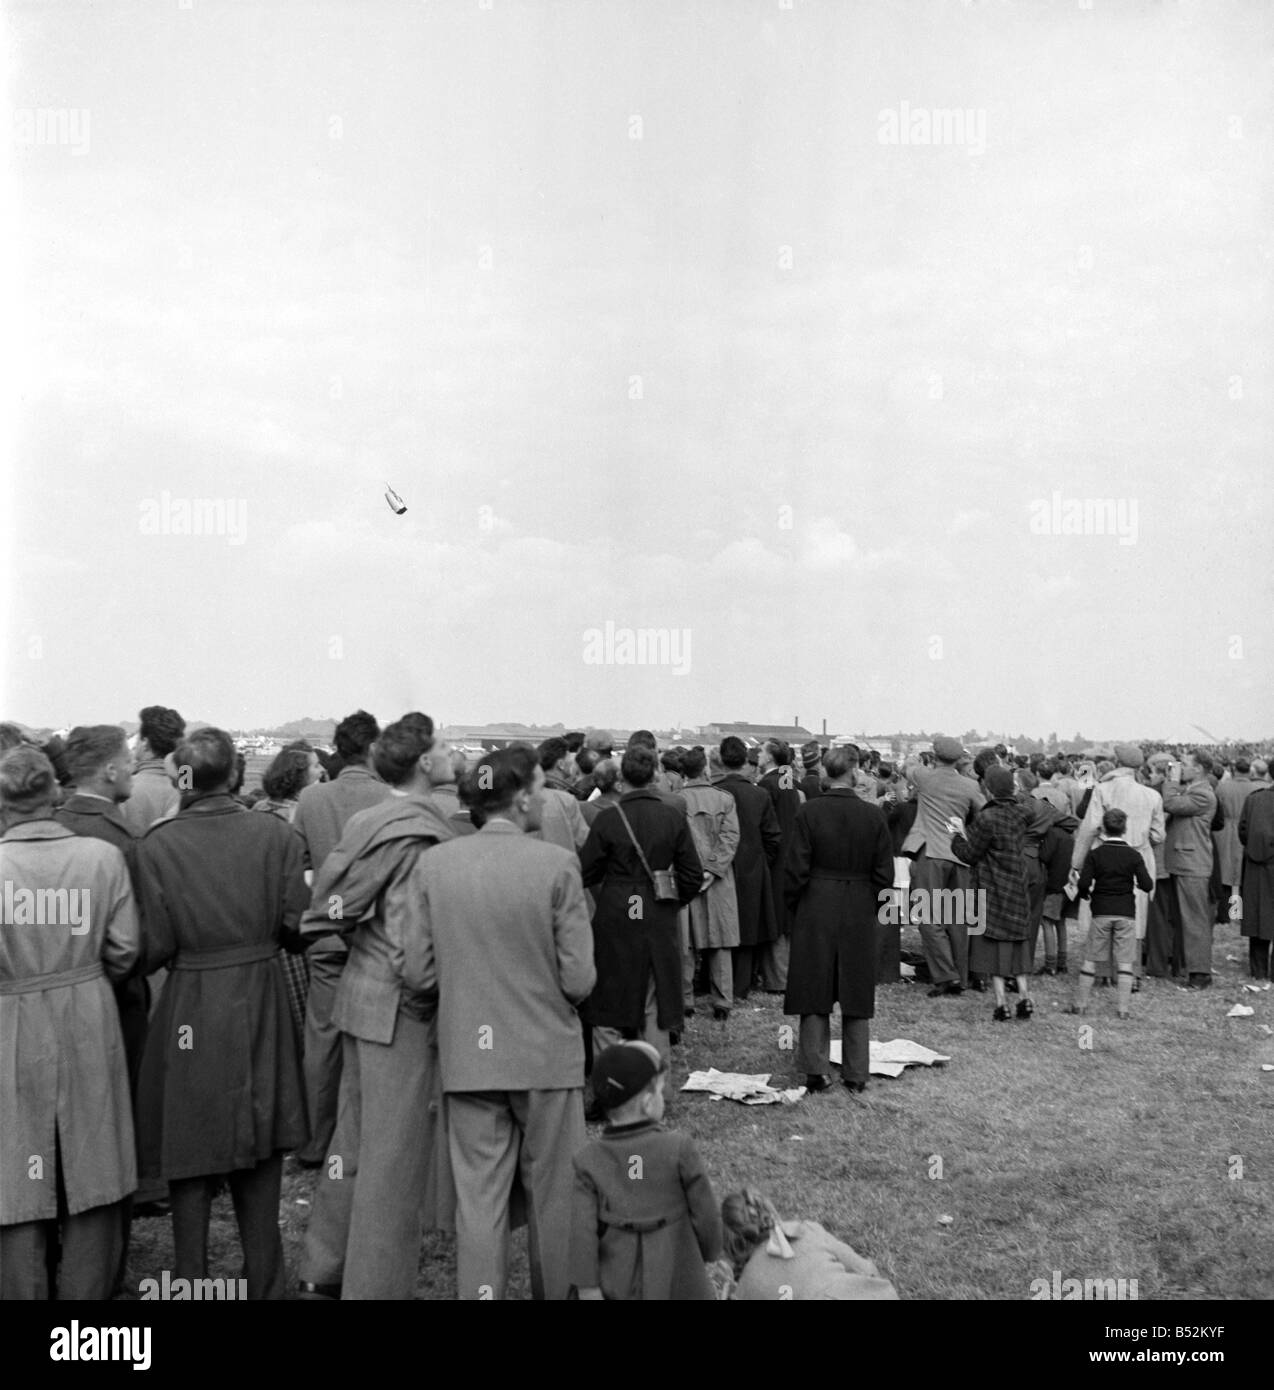 Thousands of spectators watched as a De Havilland 110 aircraft broke the sound barrier and then disintegrated in the sky above them and fell to earth.;Thirty-one people, including pilot John Derry, were killed. Dozens more were wounded at the Farnborough Air Show in Hampshire on 6 September 1952.;John Derry became the first British pilot to break the sound barrier, during a record attempt exactly four years before the accident. September 1952 C4399 Stock Photo